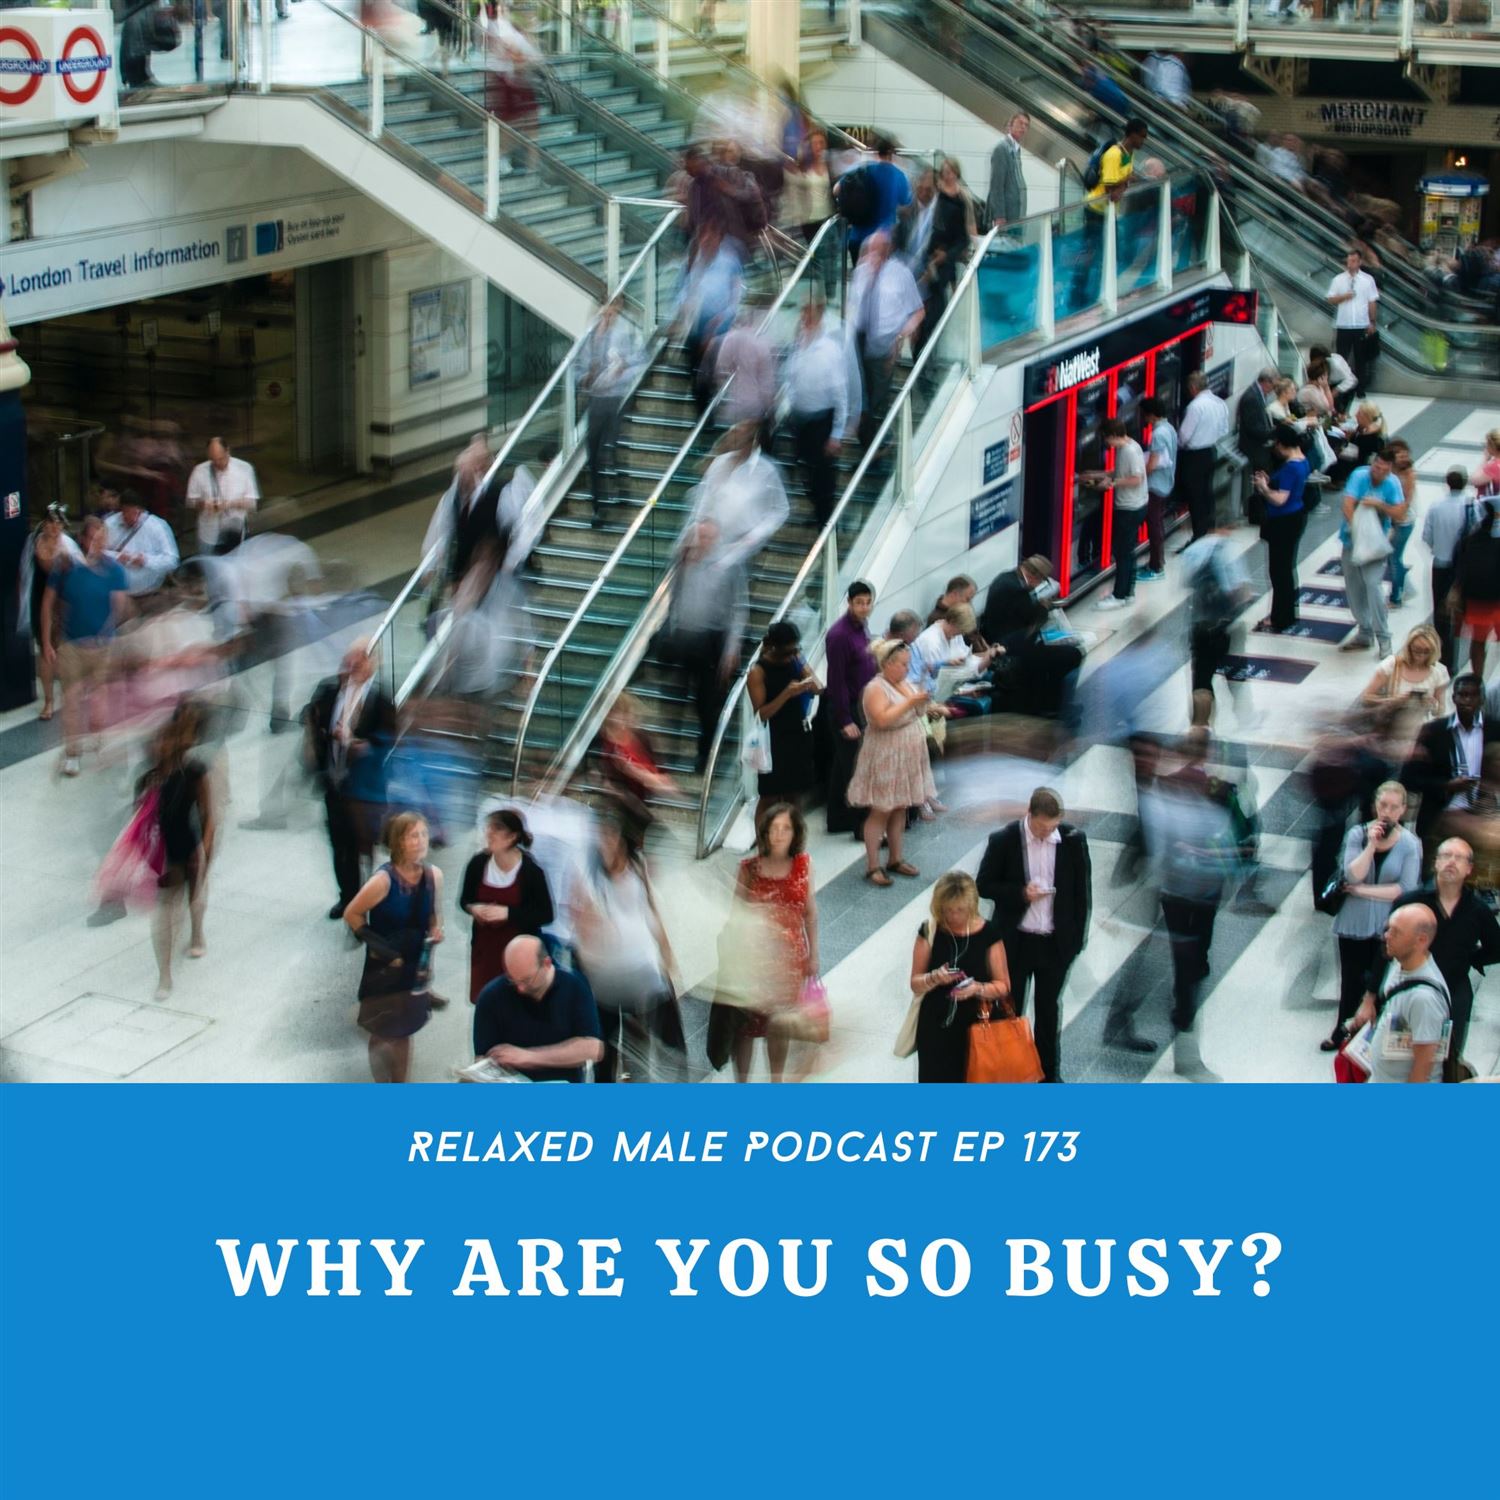 Why Are You So Busy?